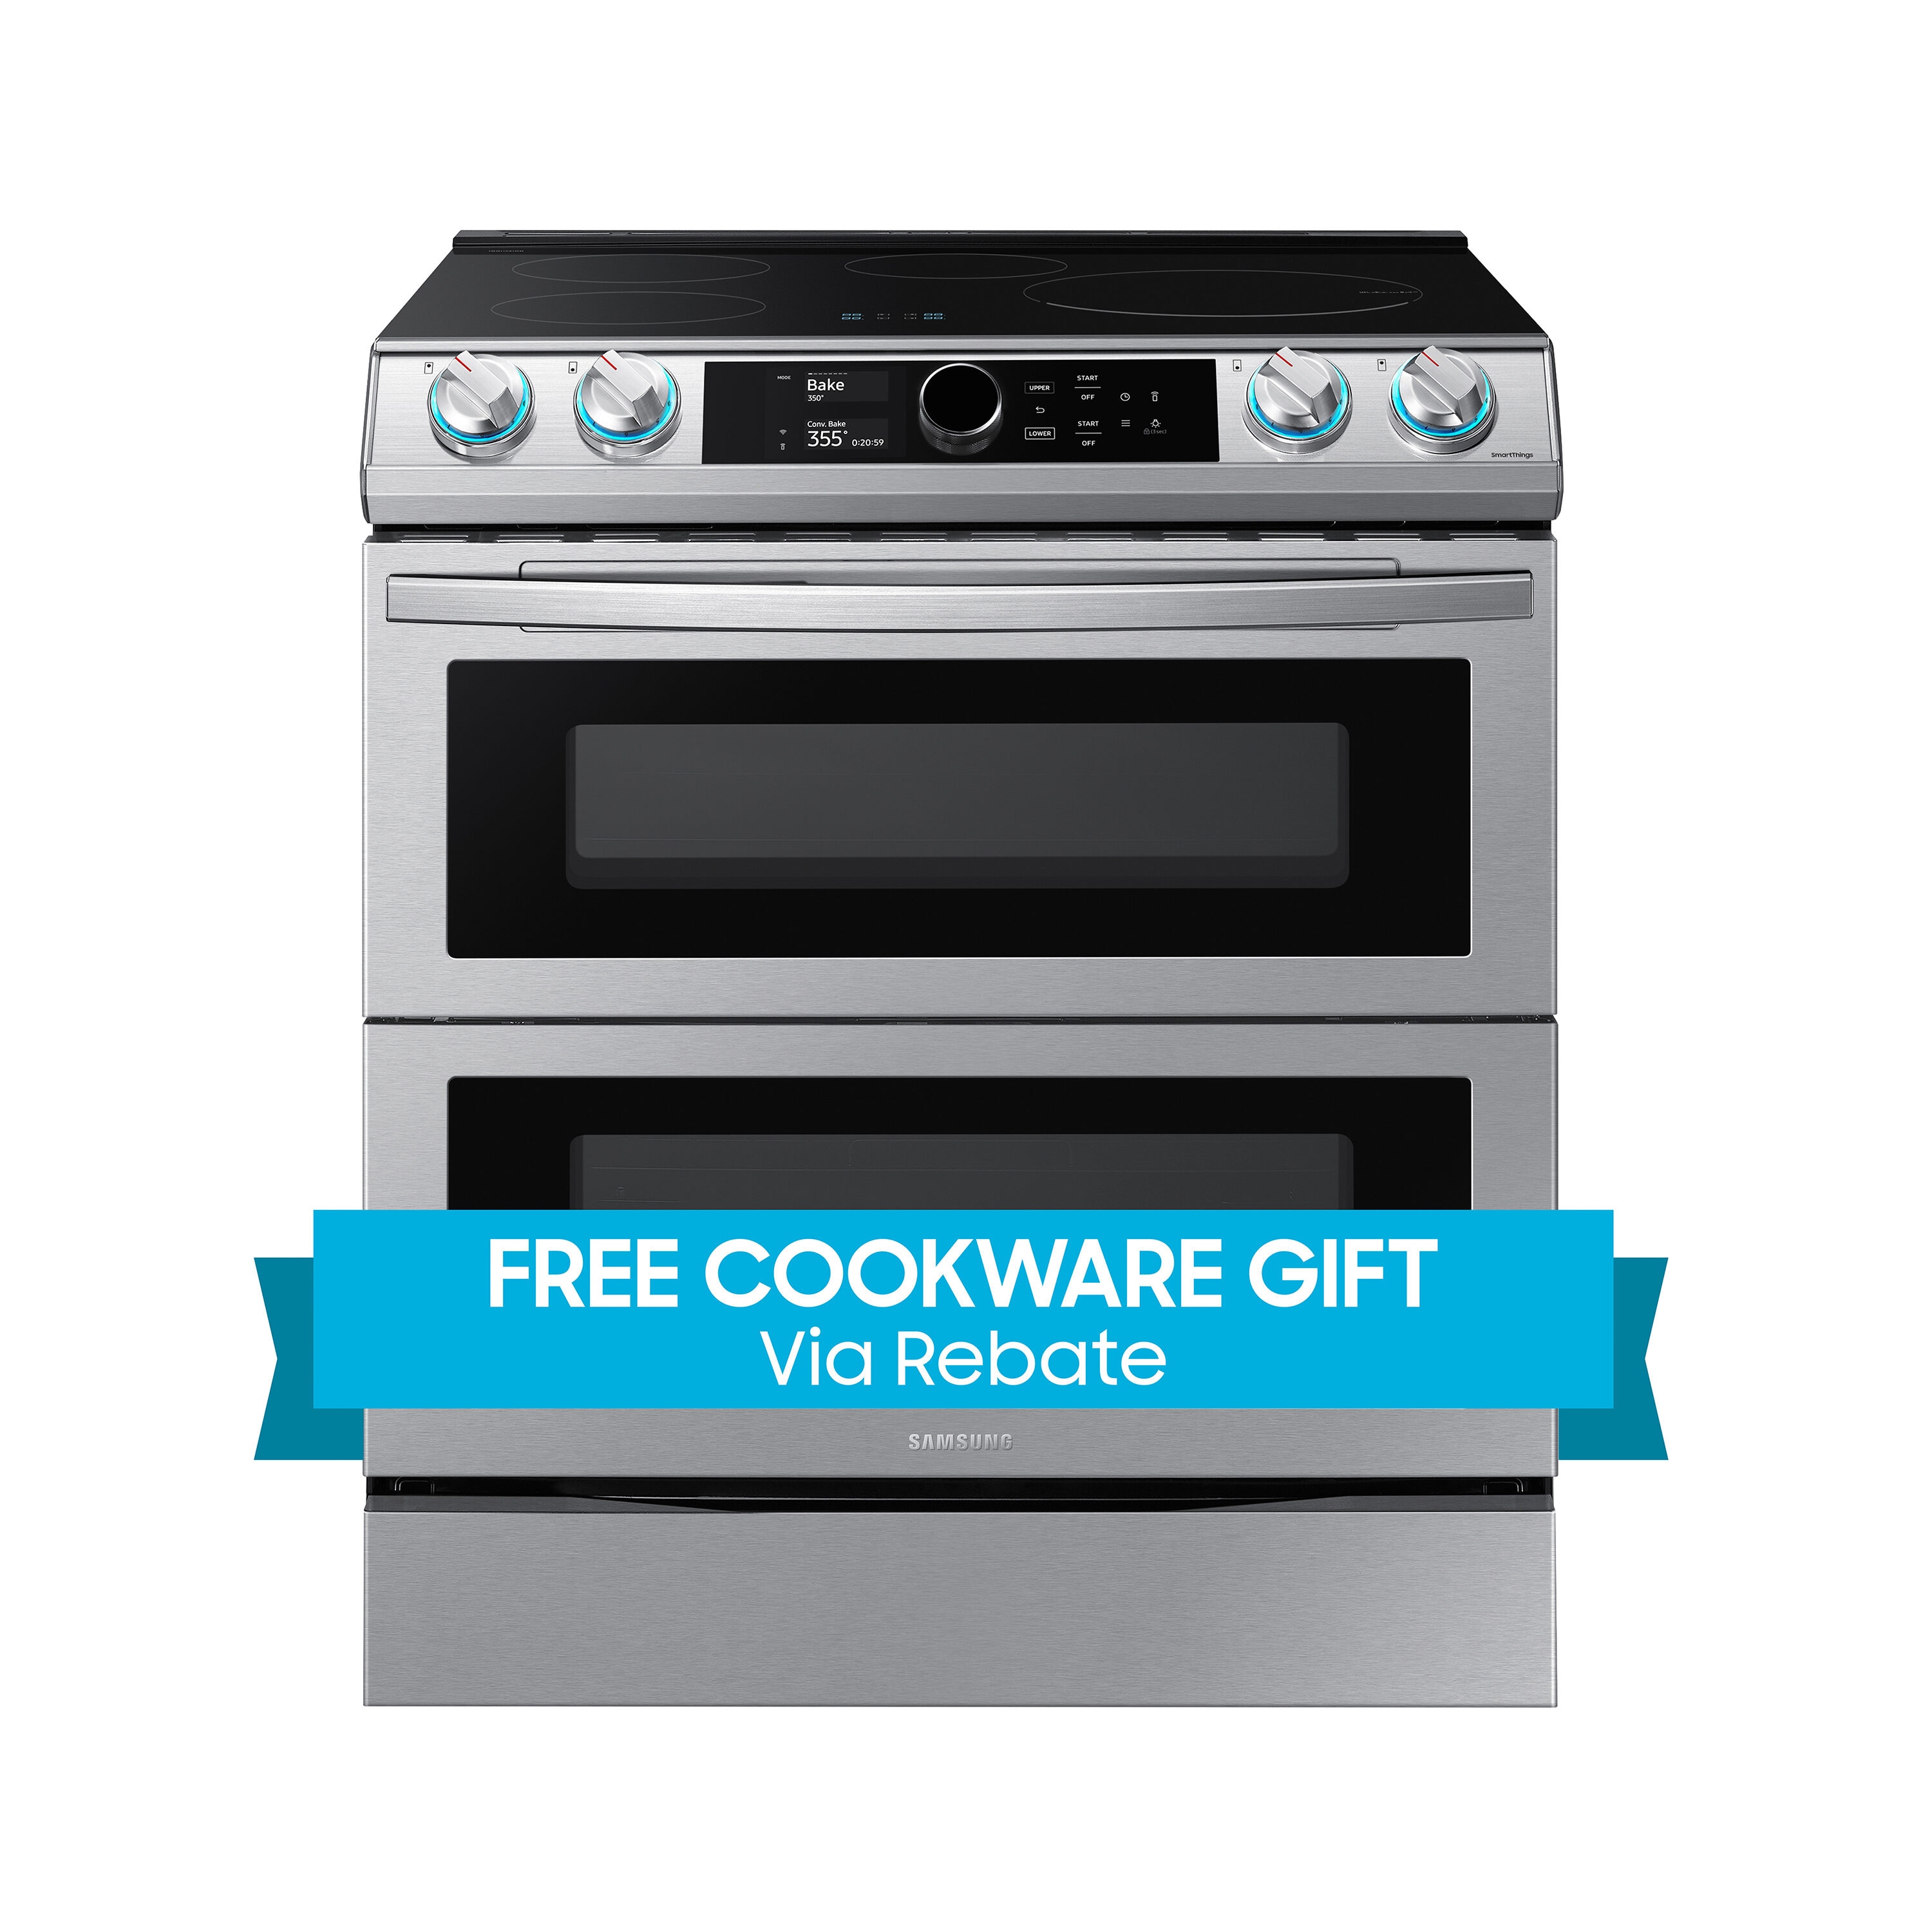 Electric Commercial Baking Ovens , Countertop Double Convection Oven Hot  Air Ventilation